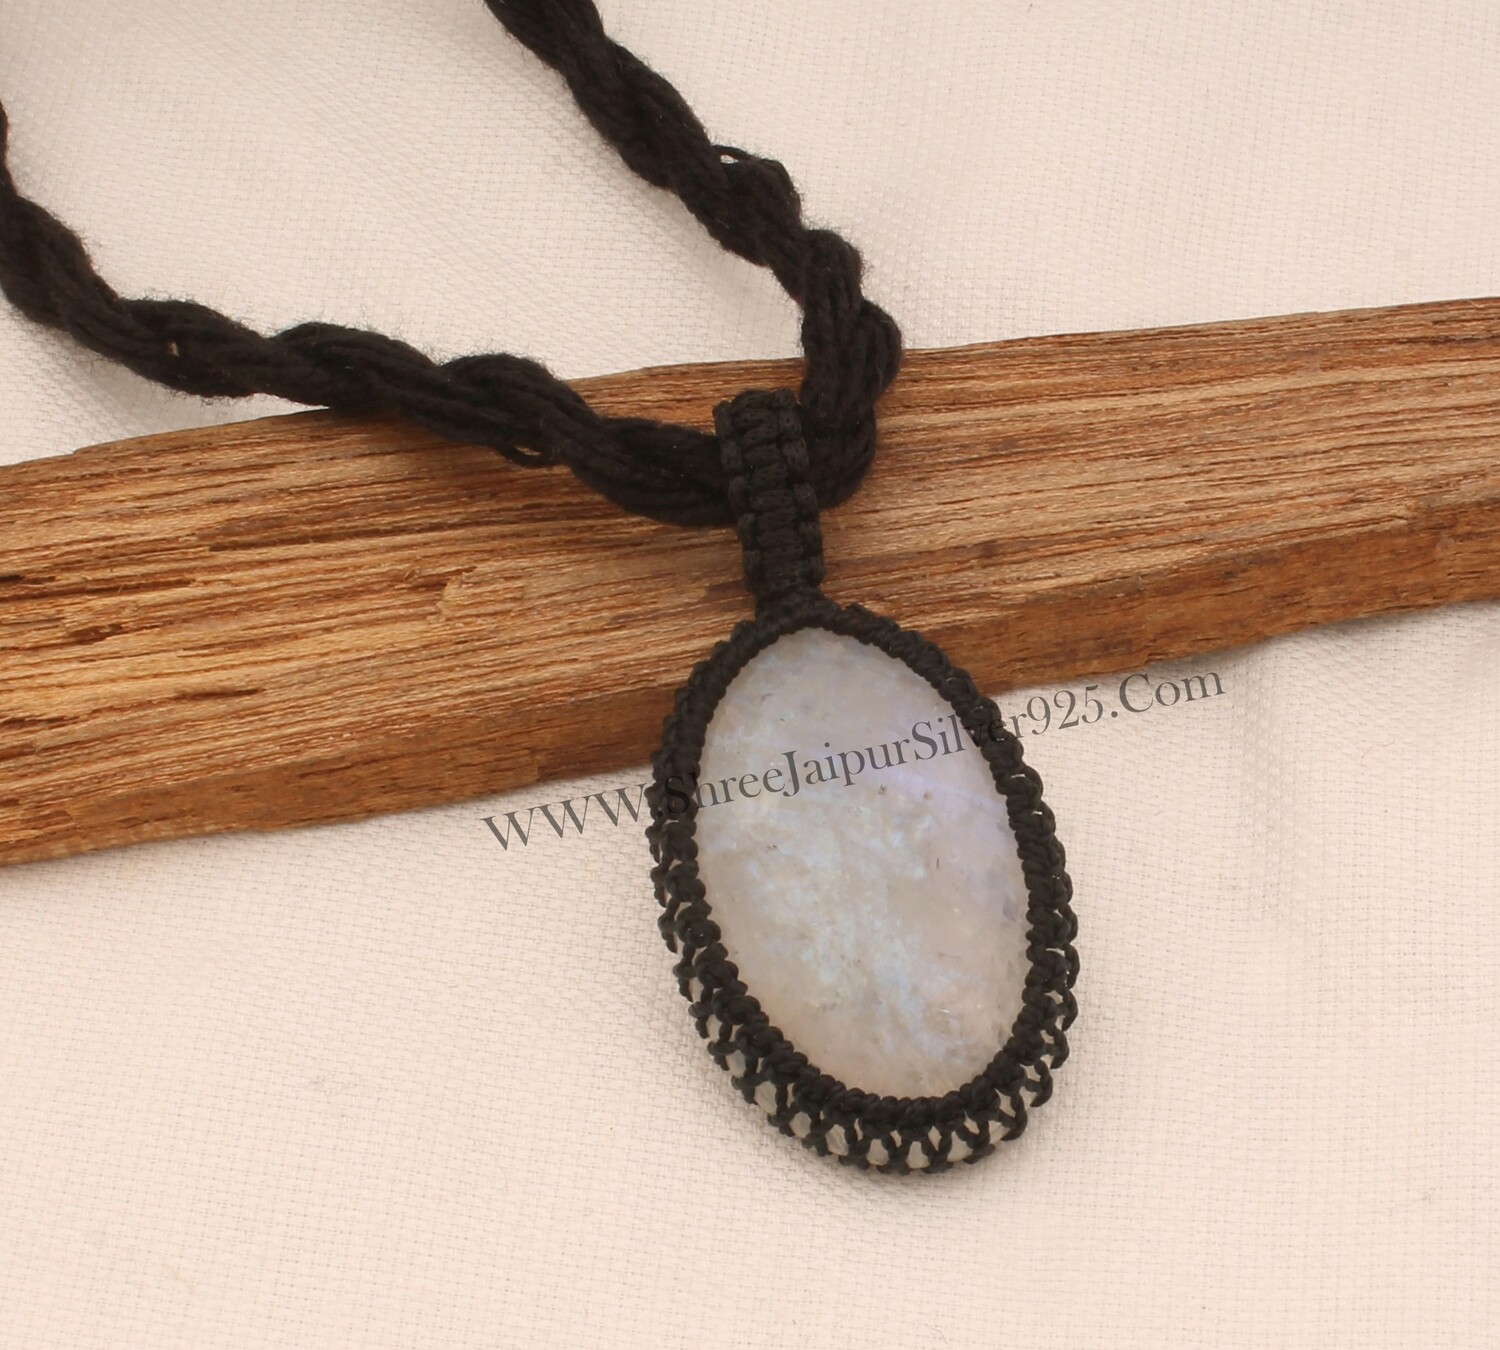 Rainbow Moonstone Pendant Necklace Gifts For Her, Handmade Gemstone Moonstone Jewelry Gift Black Thread Pear Bohemian Necklace For Women